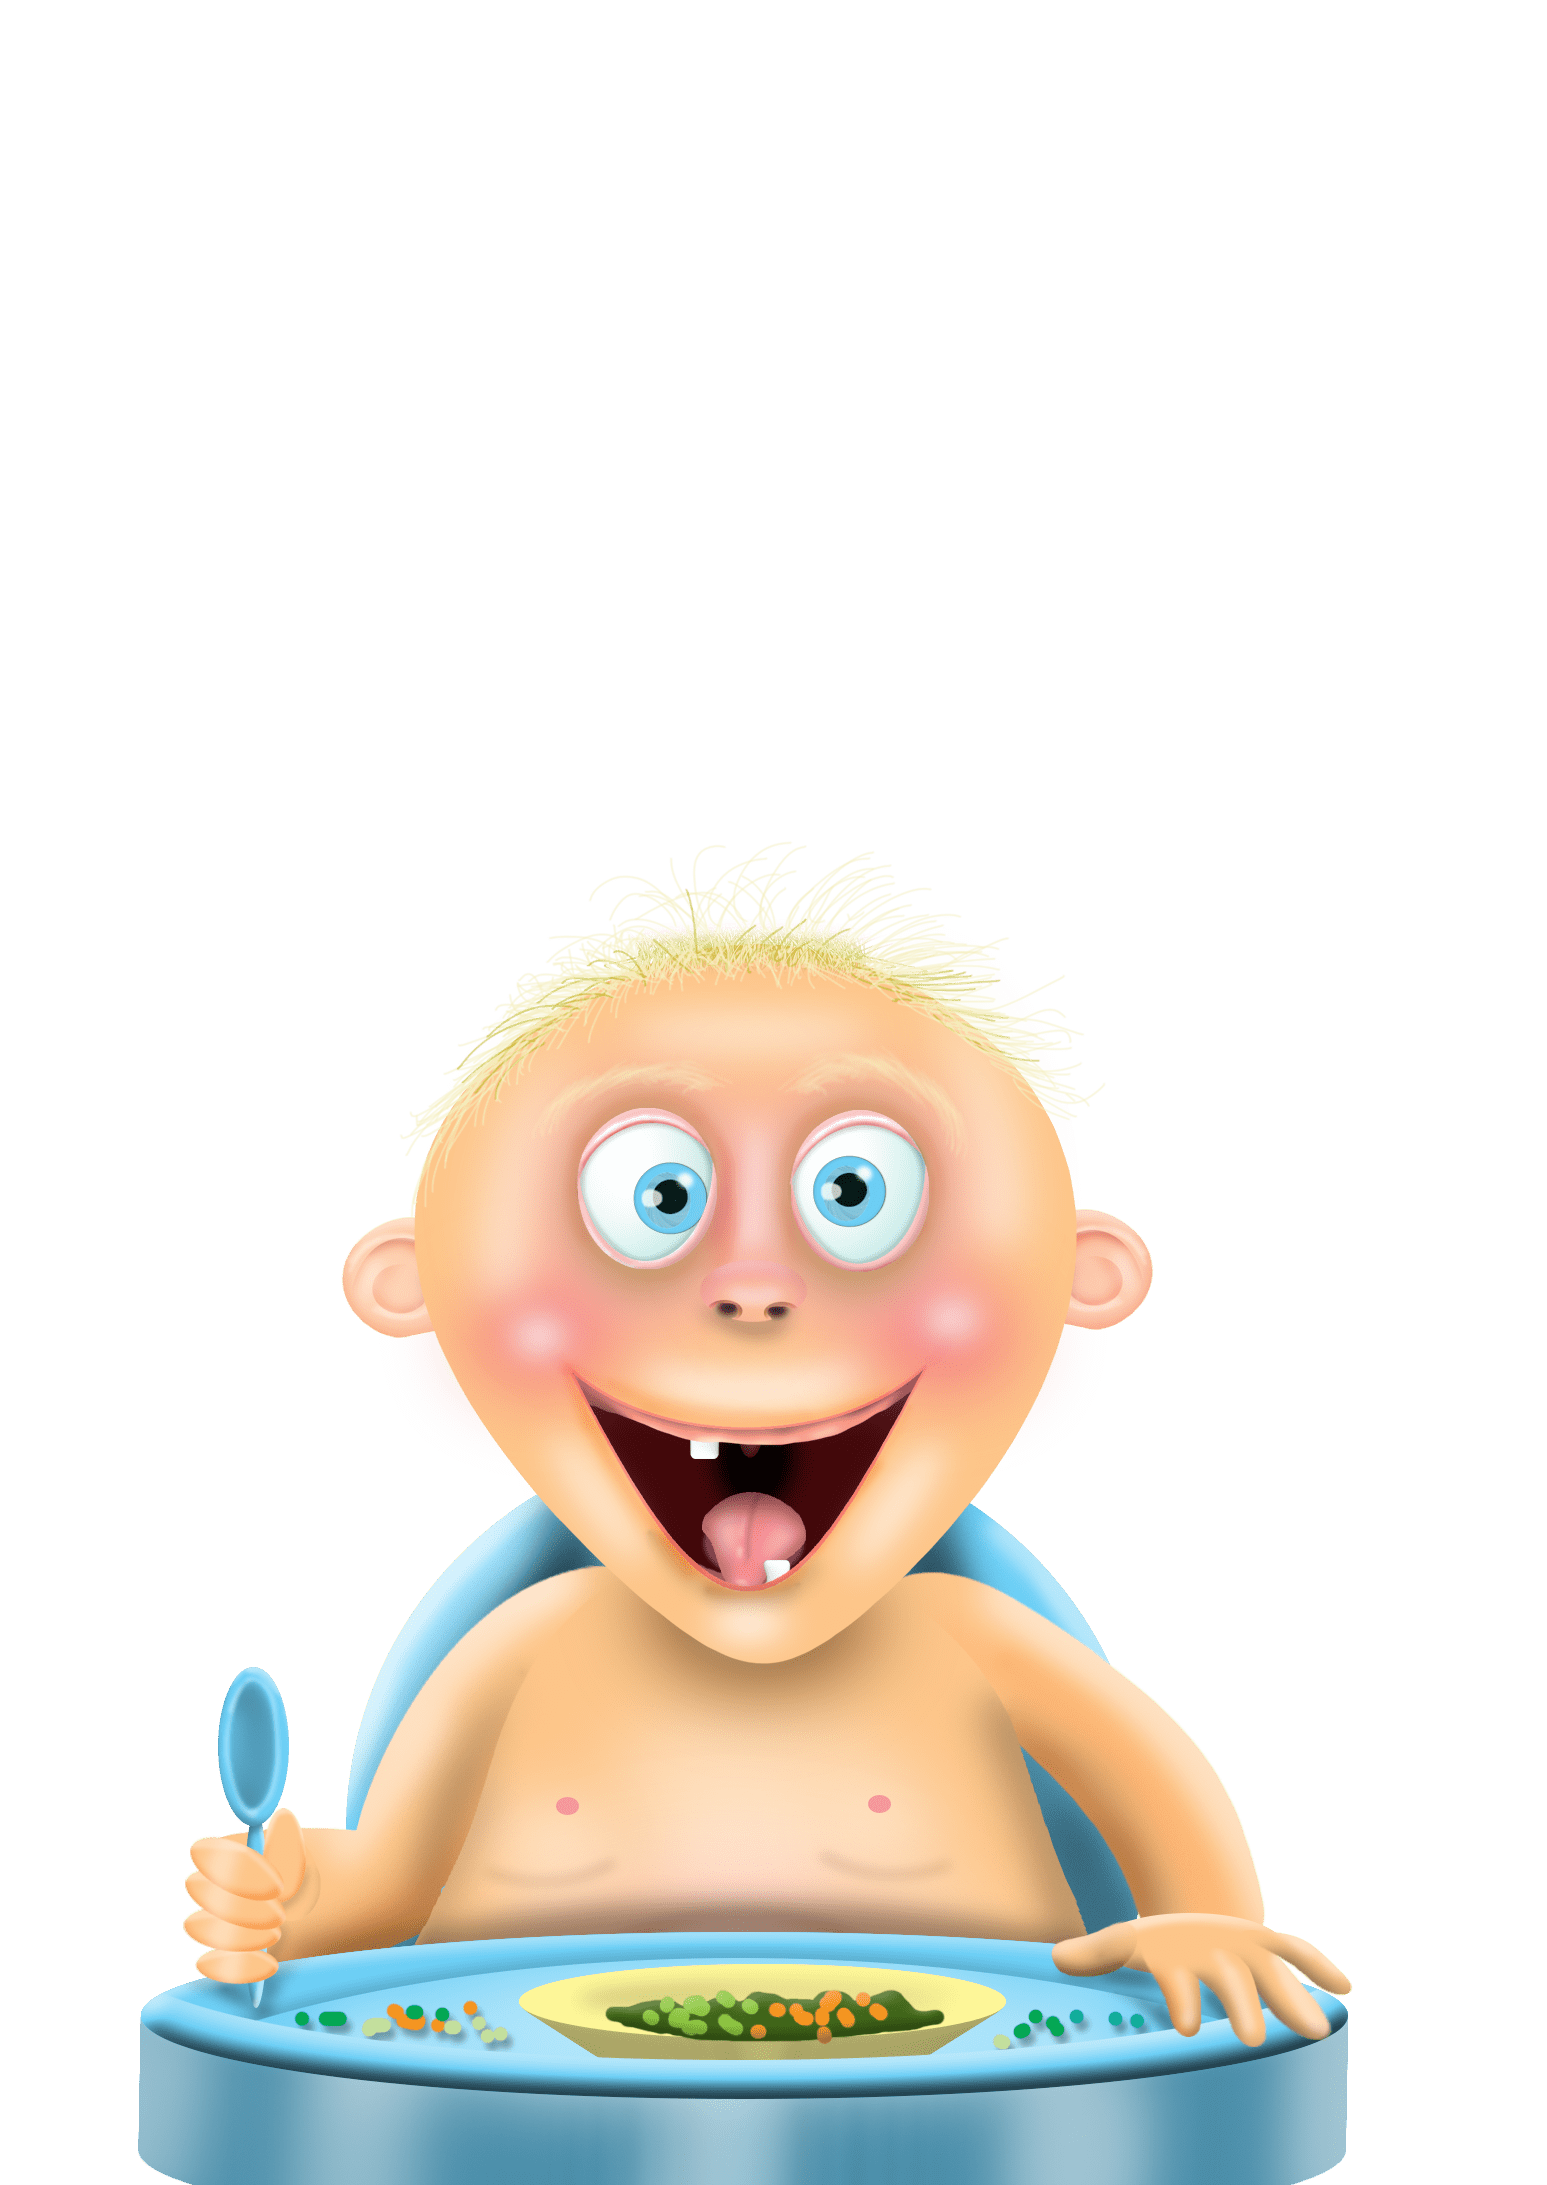 Clipart of the smiling eating boy white sitting blue photo